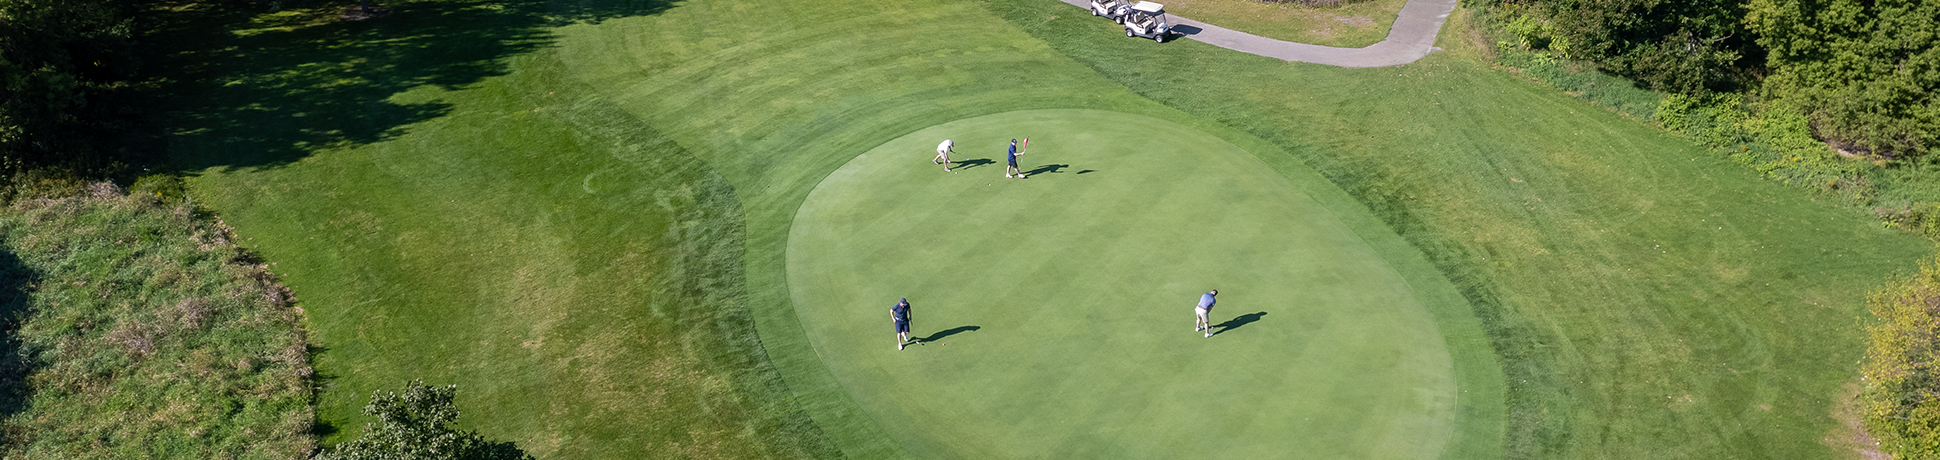 aerial view of golfers on course green